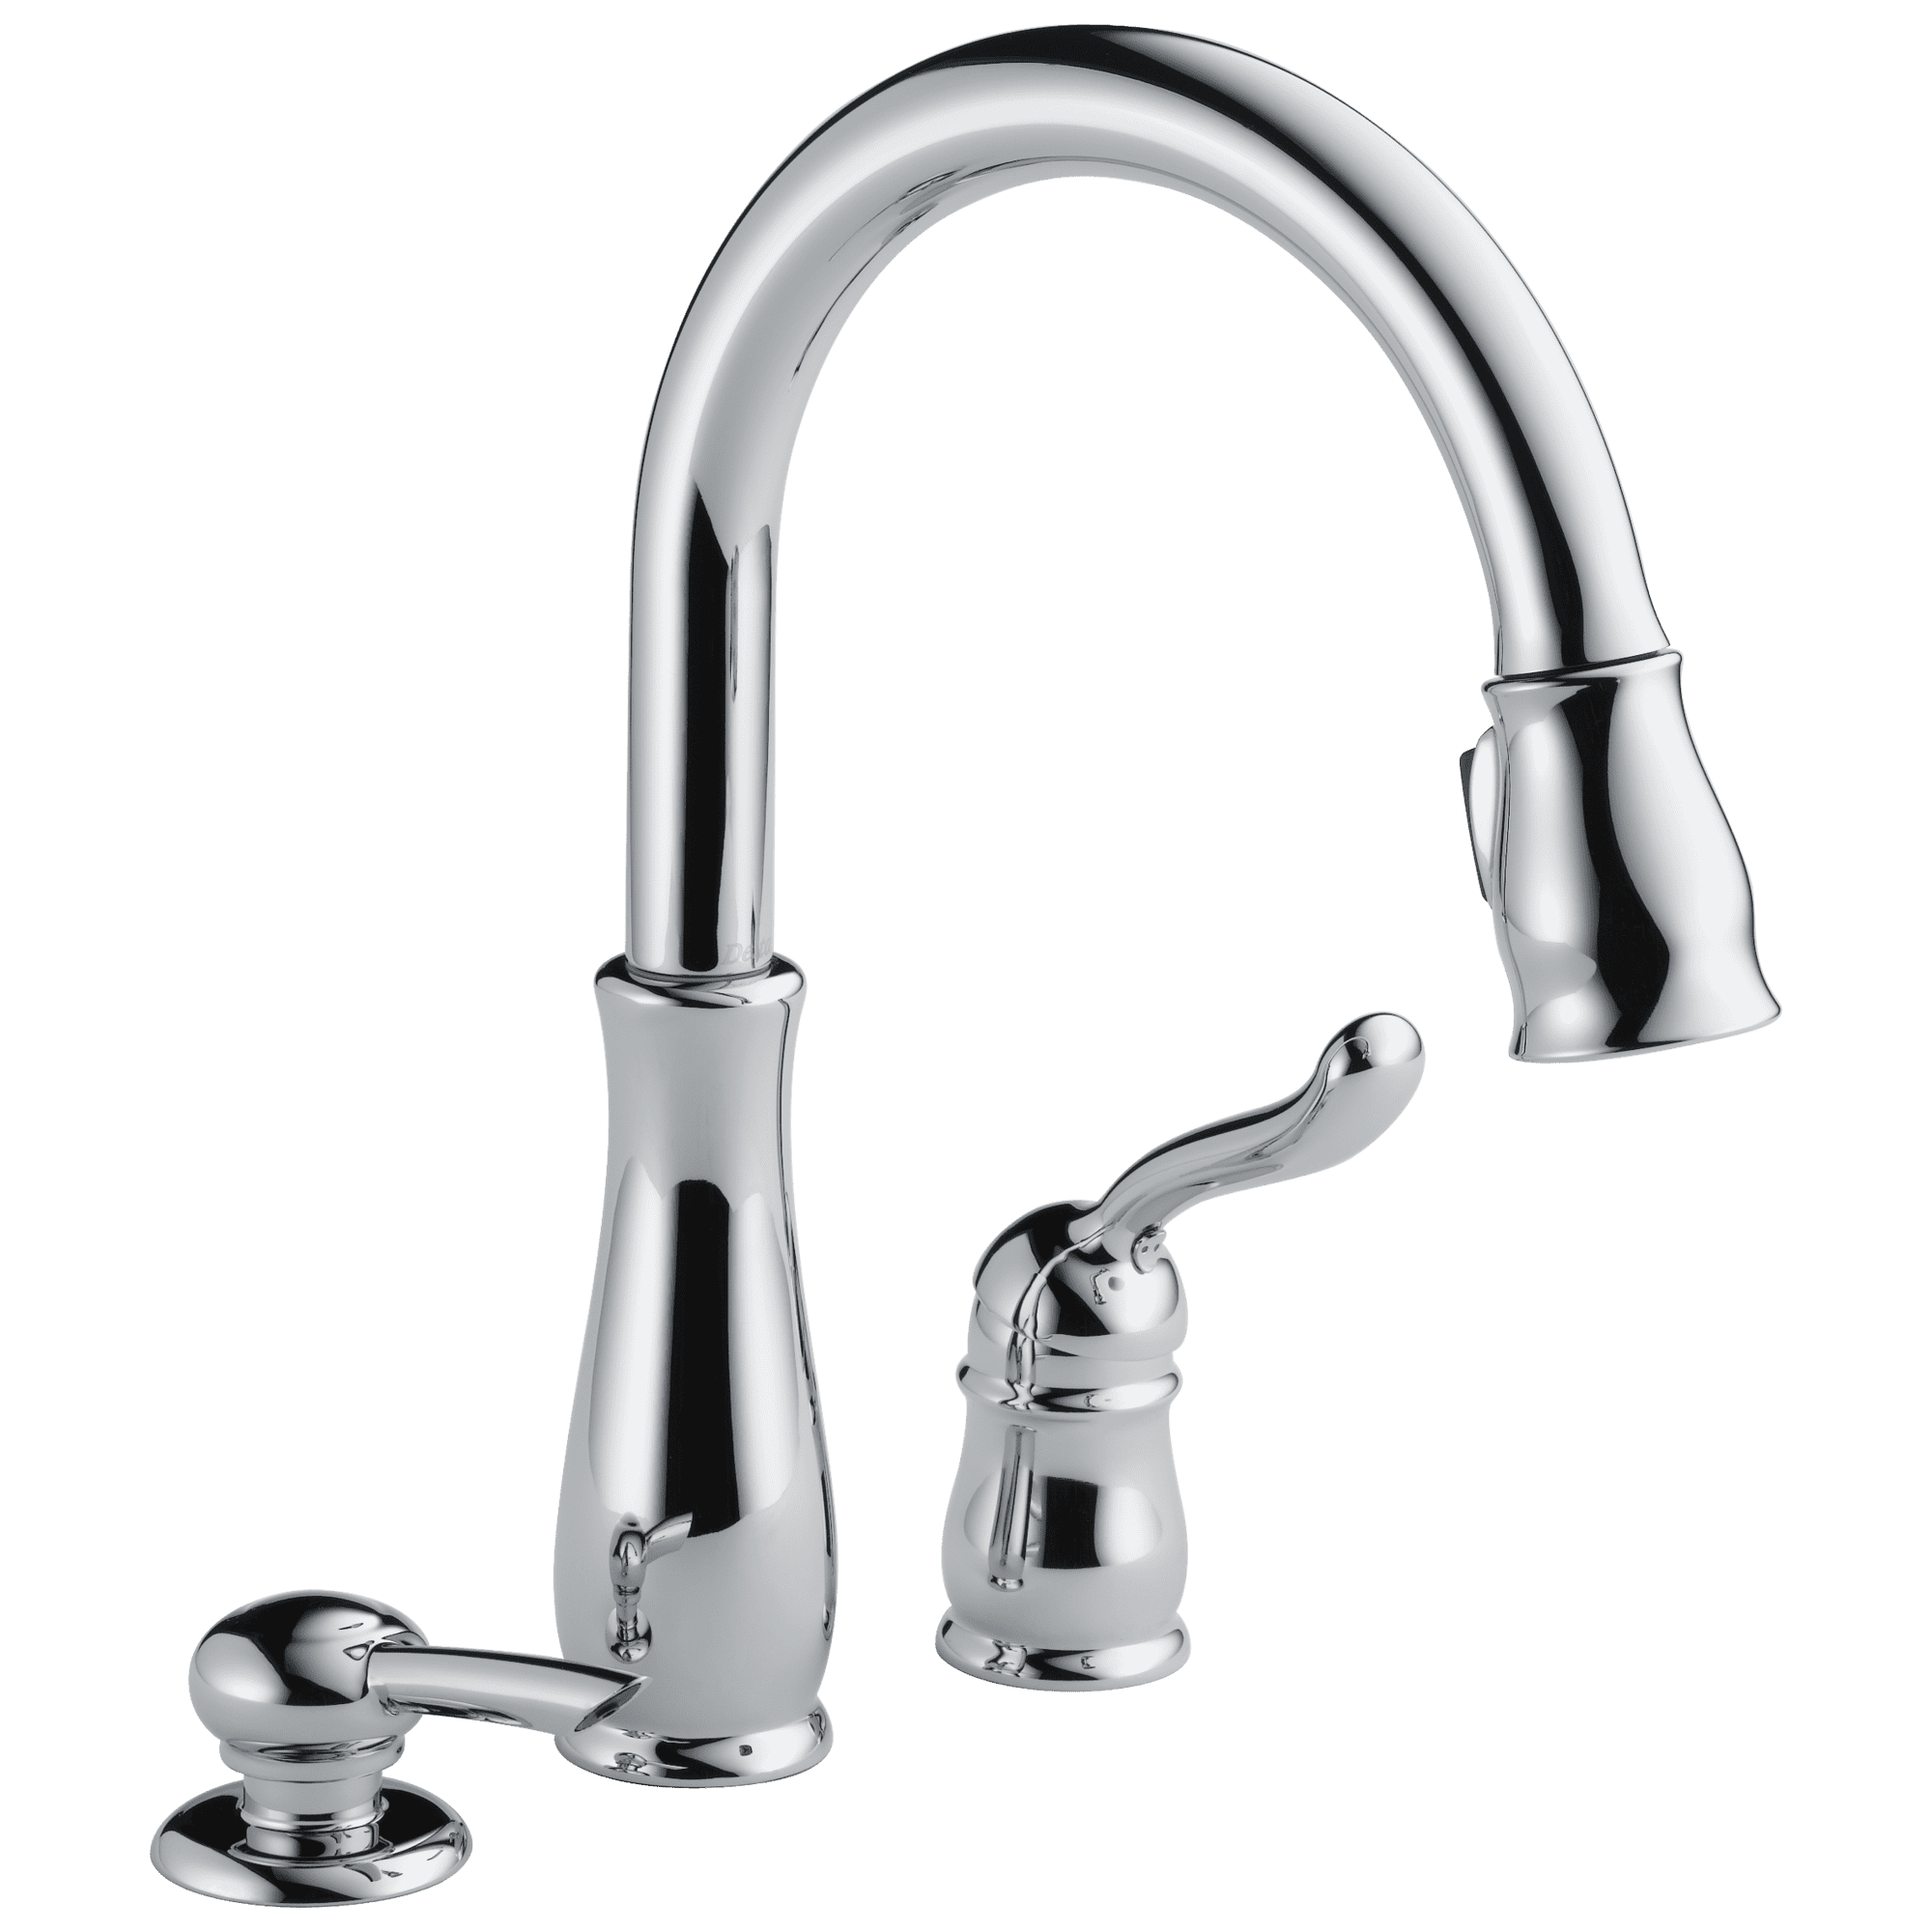 978-sd-dst Single Handle Pull-down Kitchen Faucet With Soap Dispenser